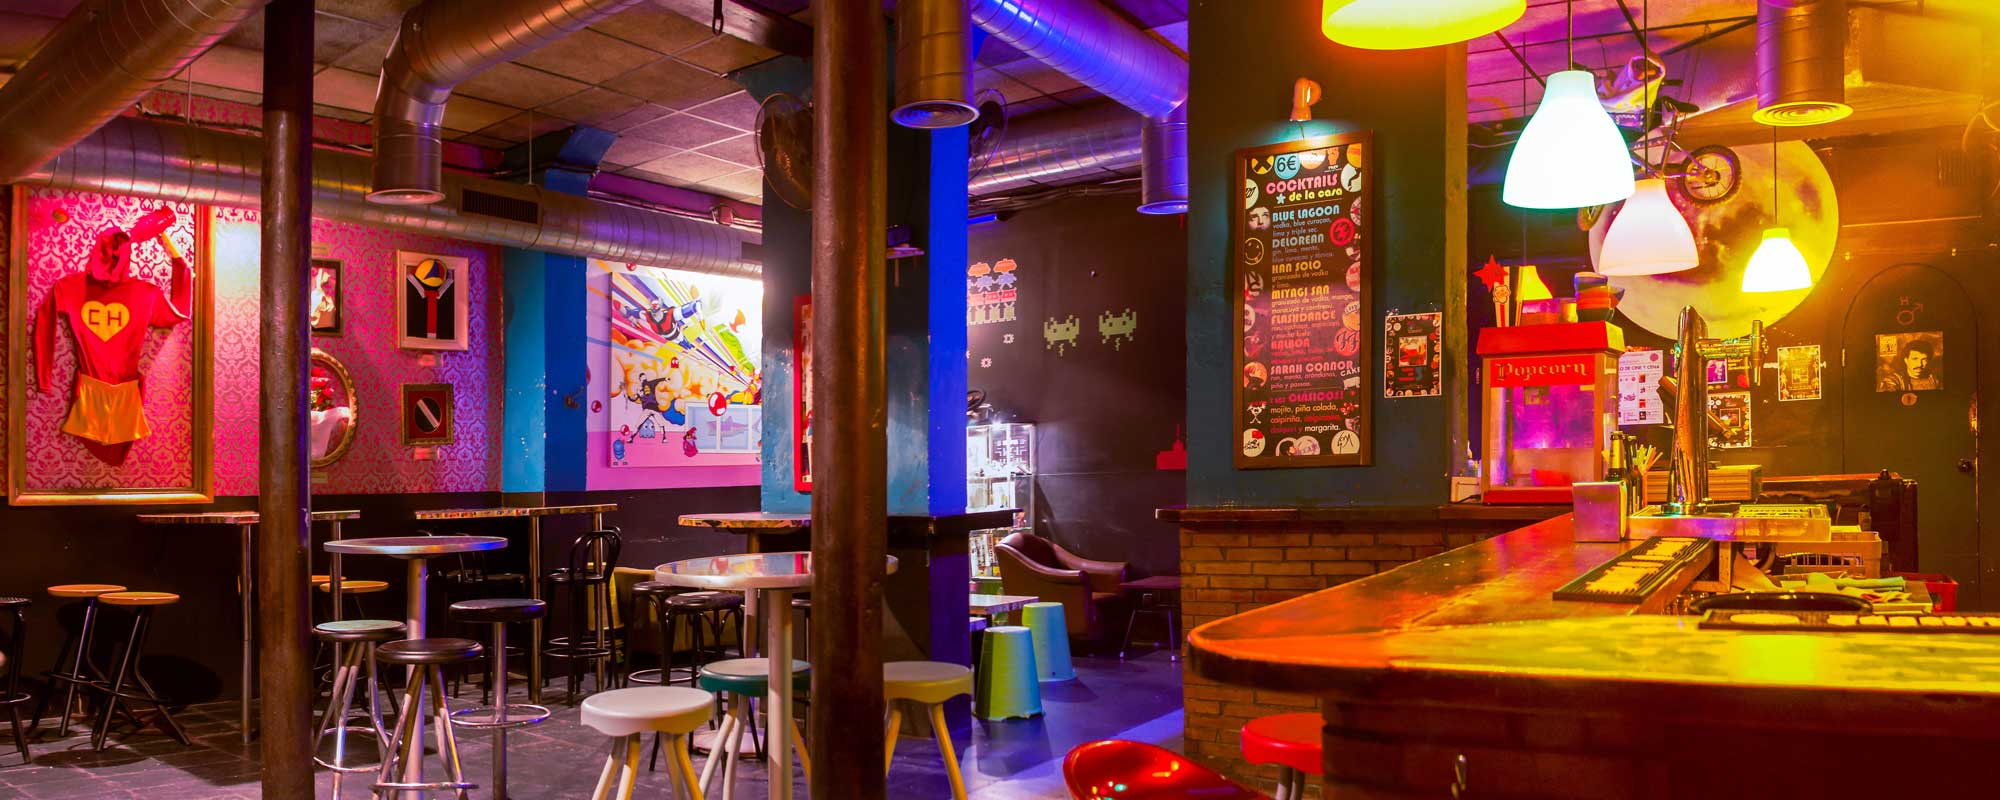 Top 5 Themed Bars In Barcelona Image